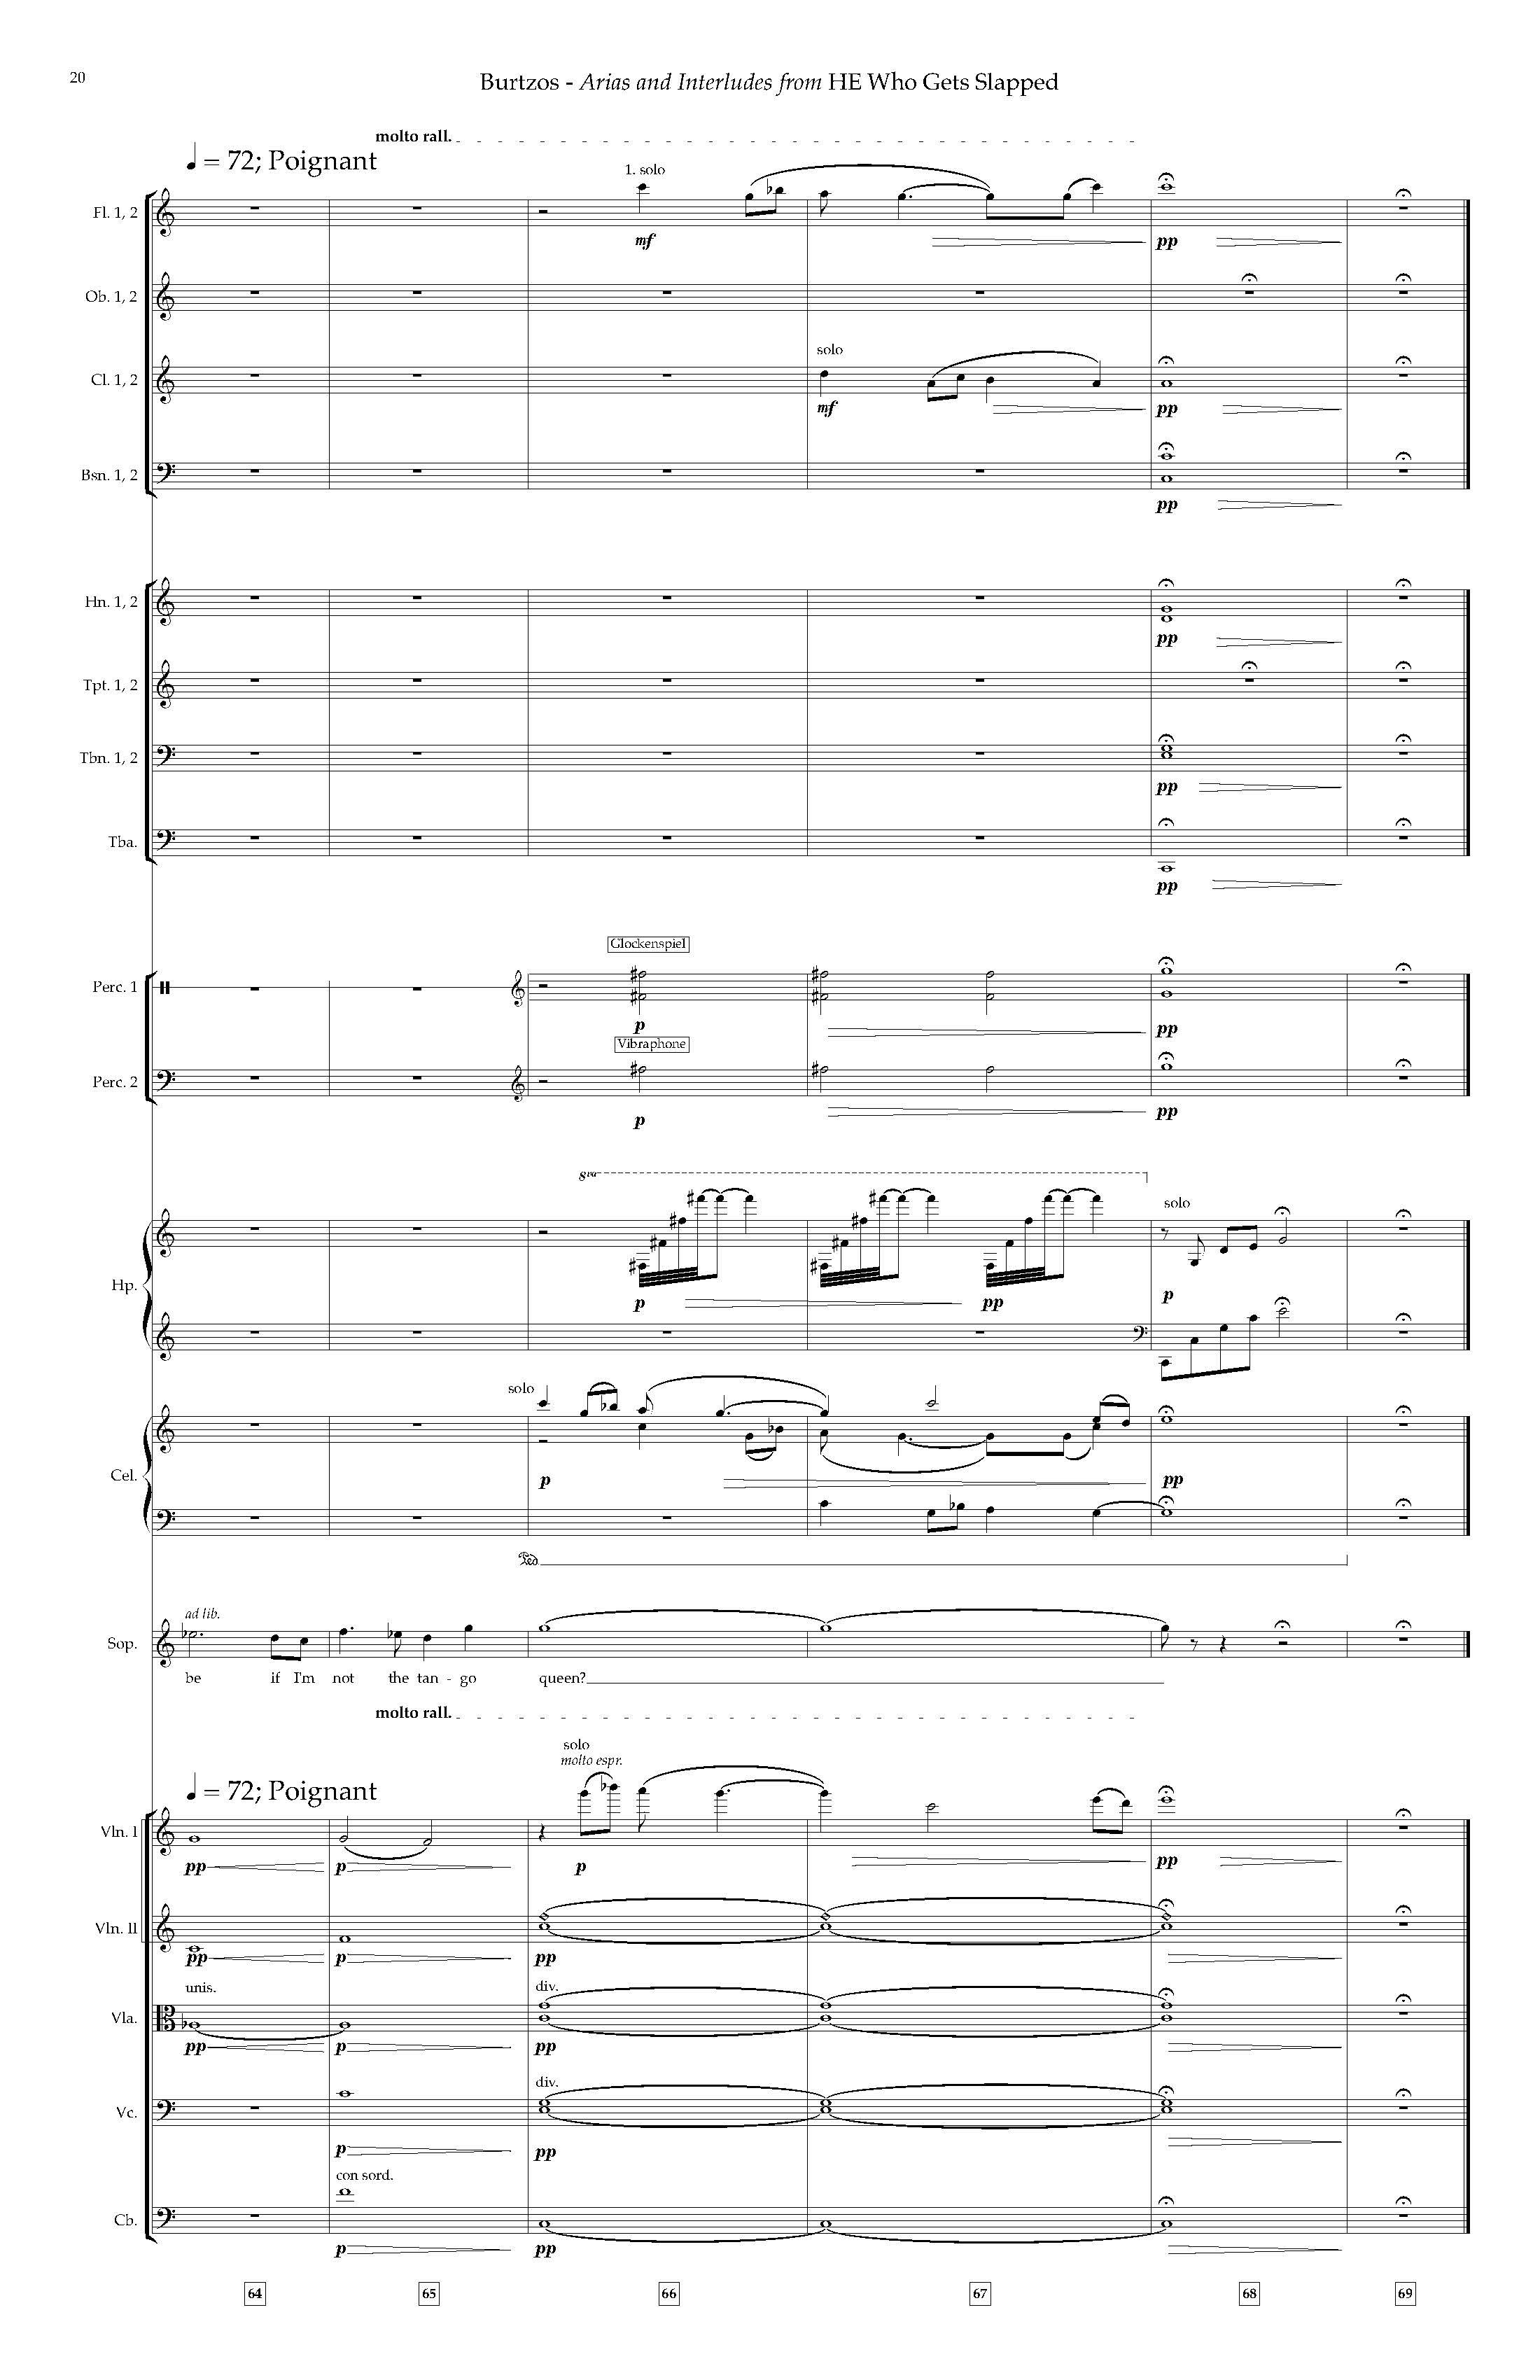 Arias and Interludes from HWGS - Complete Score_Page_26.jpg